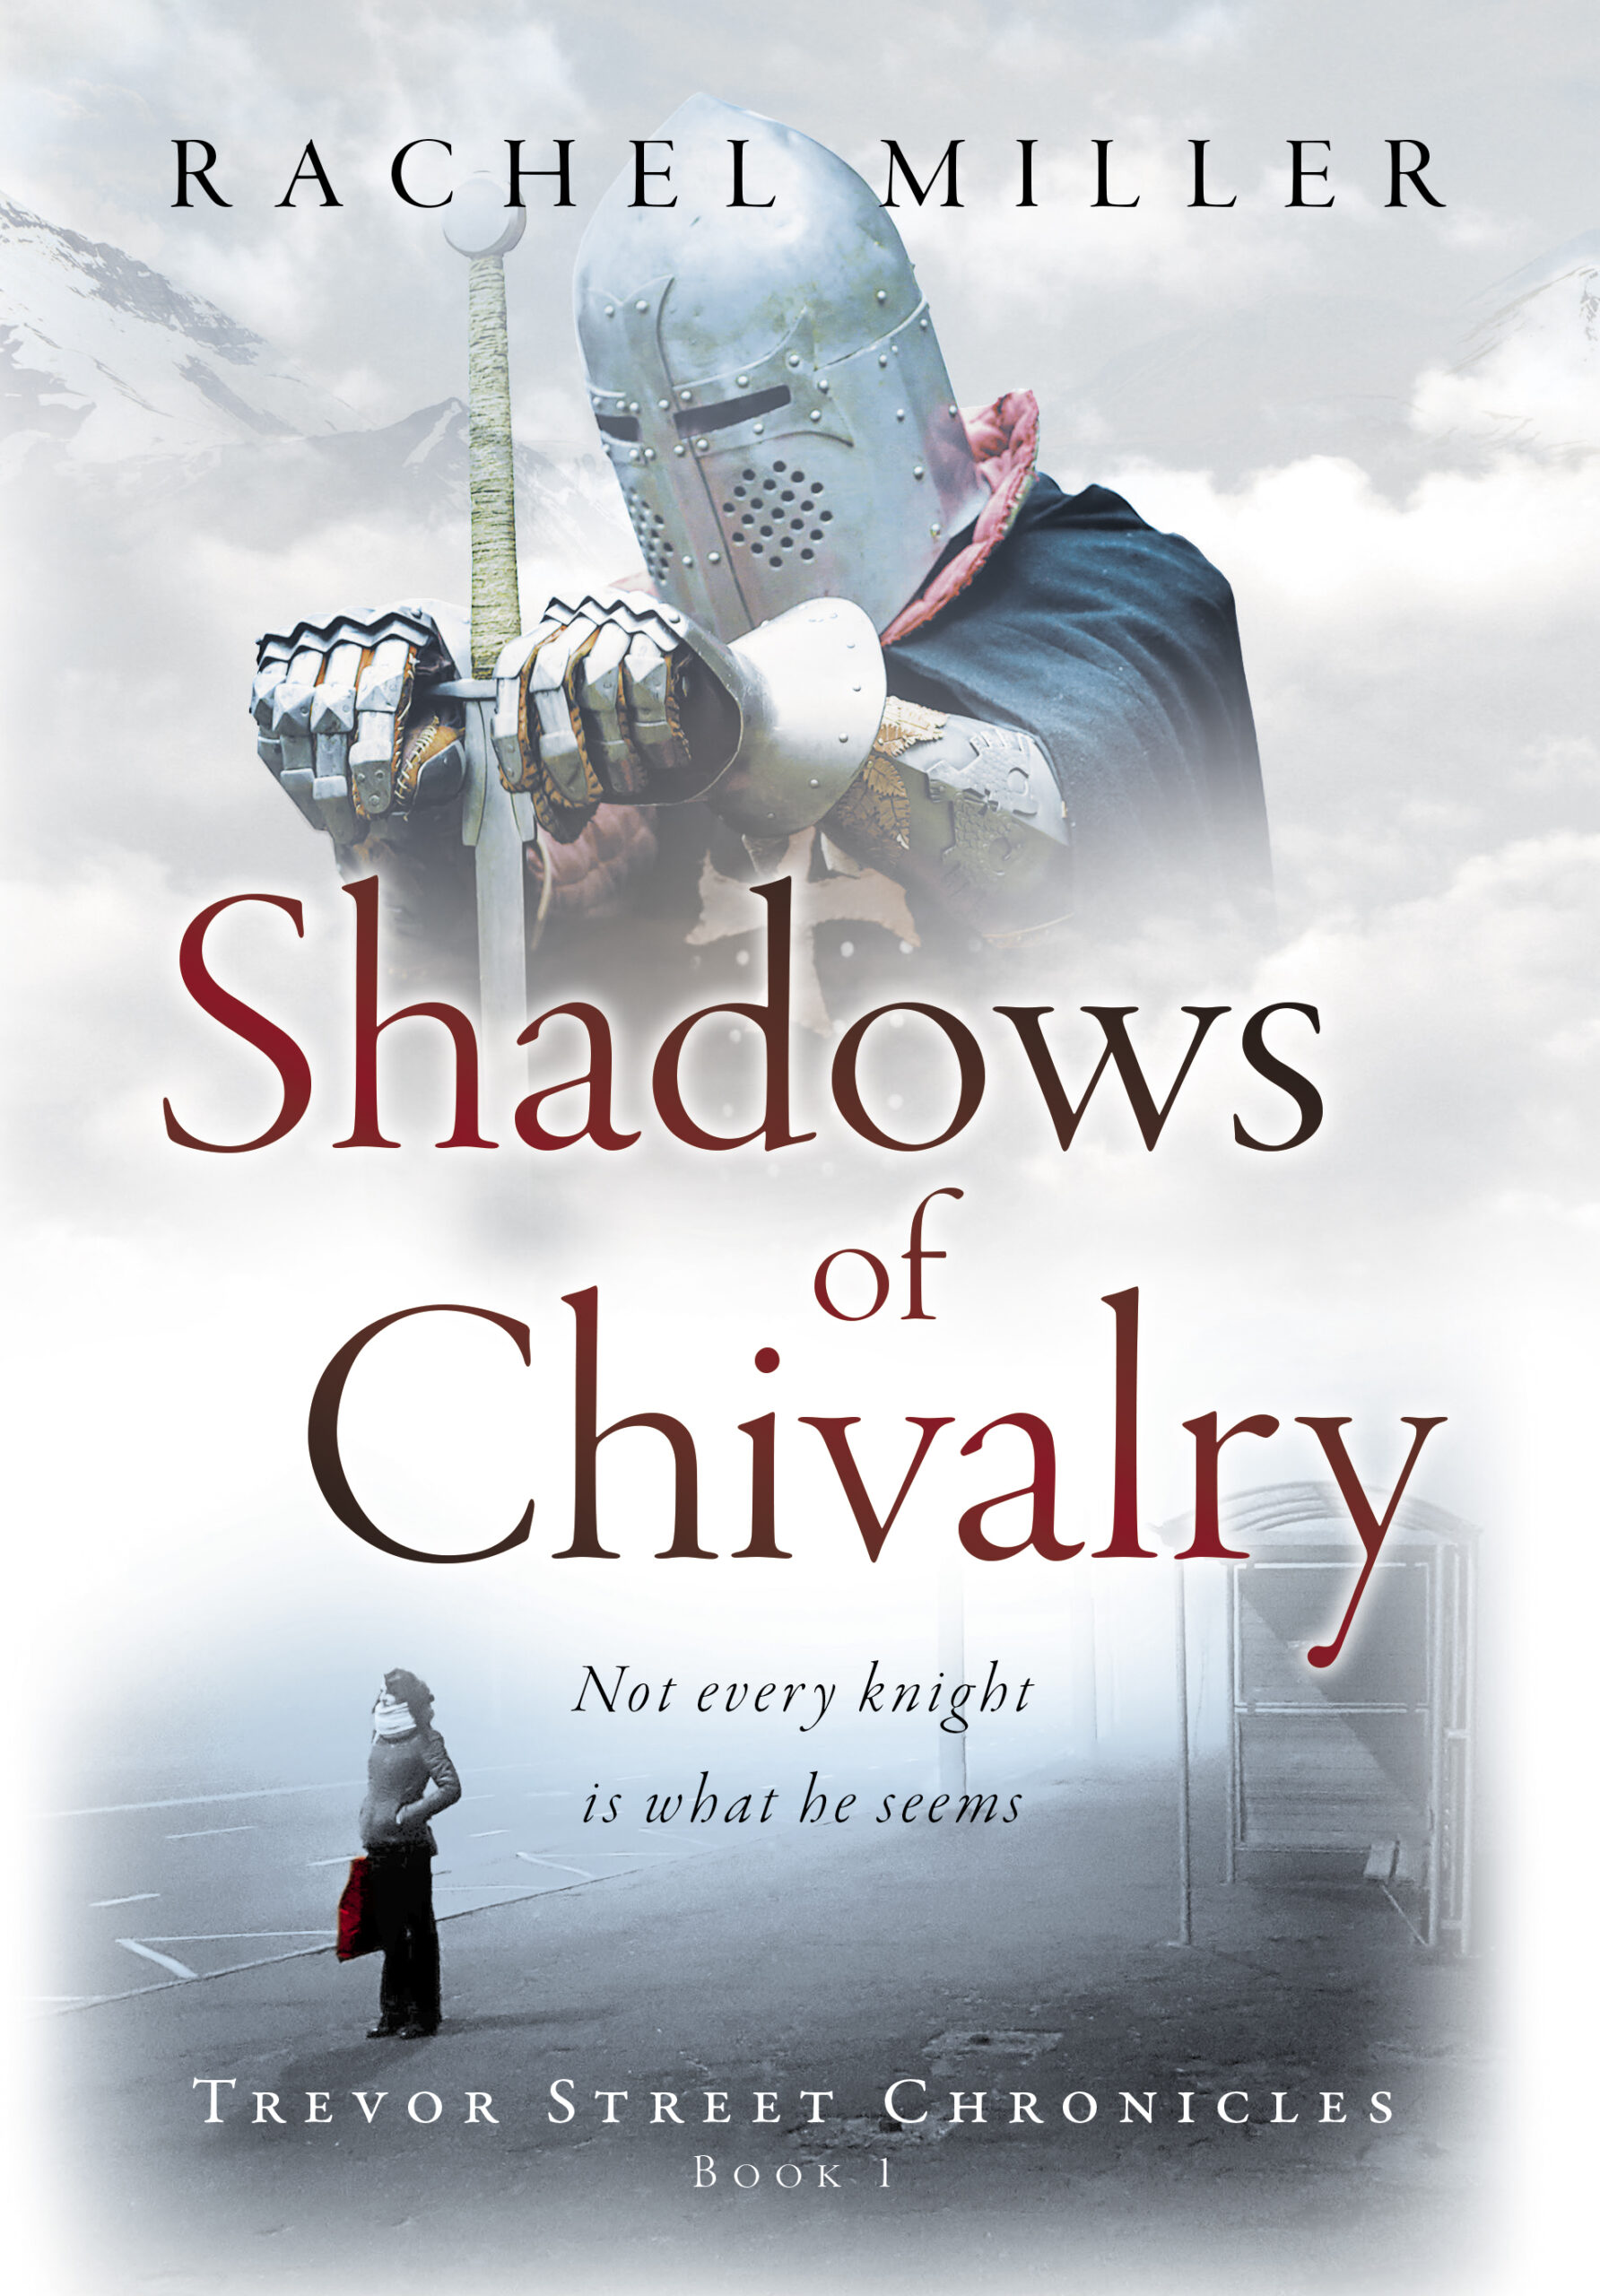 Shadows of Chivalry Cover